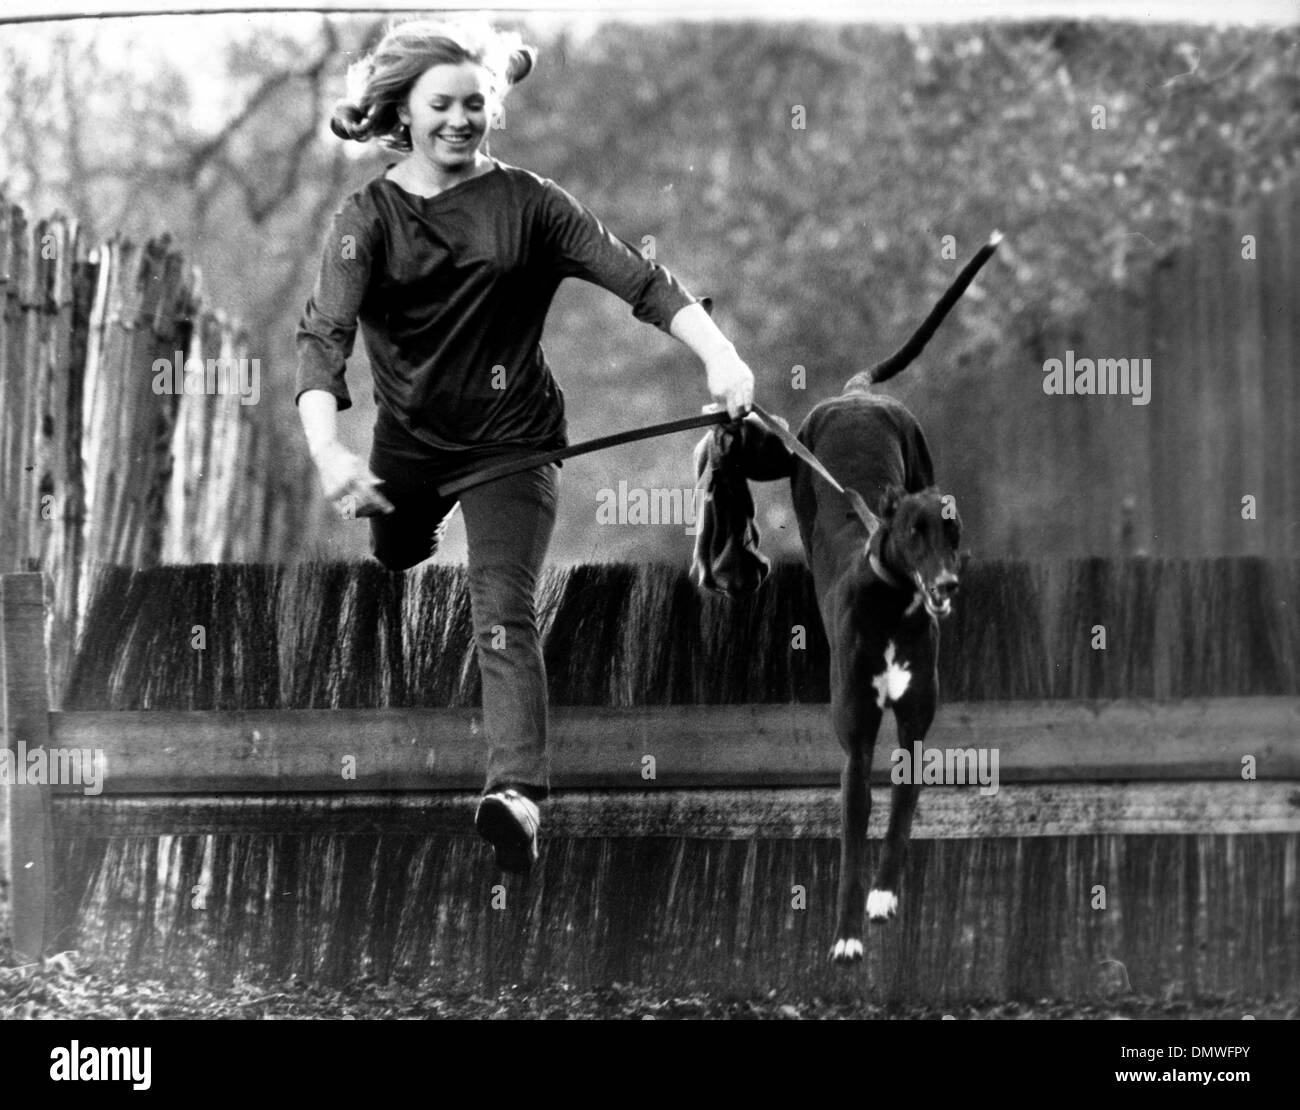 Jan. 20, 1965 - London, England, U.K. - NORAH MCELLISTRIM of the Norahmac Racing Club, seen training with her first Greyhound puppy to train to race. (Credit Image: © KEYSTONE Pictures USA/ZUMAPRESS.com) Stock Photo